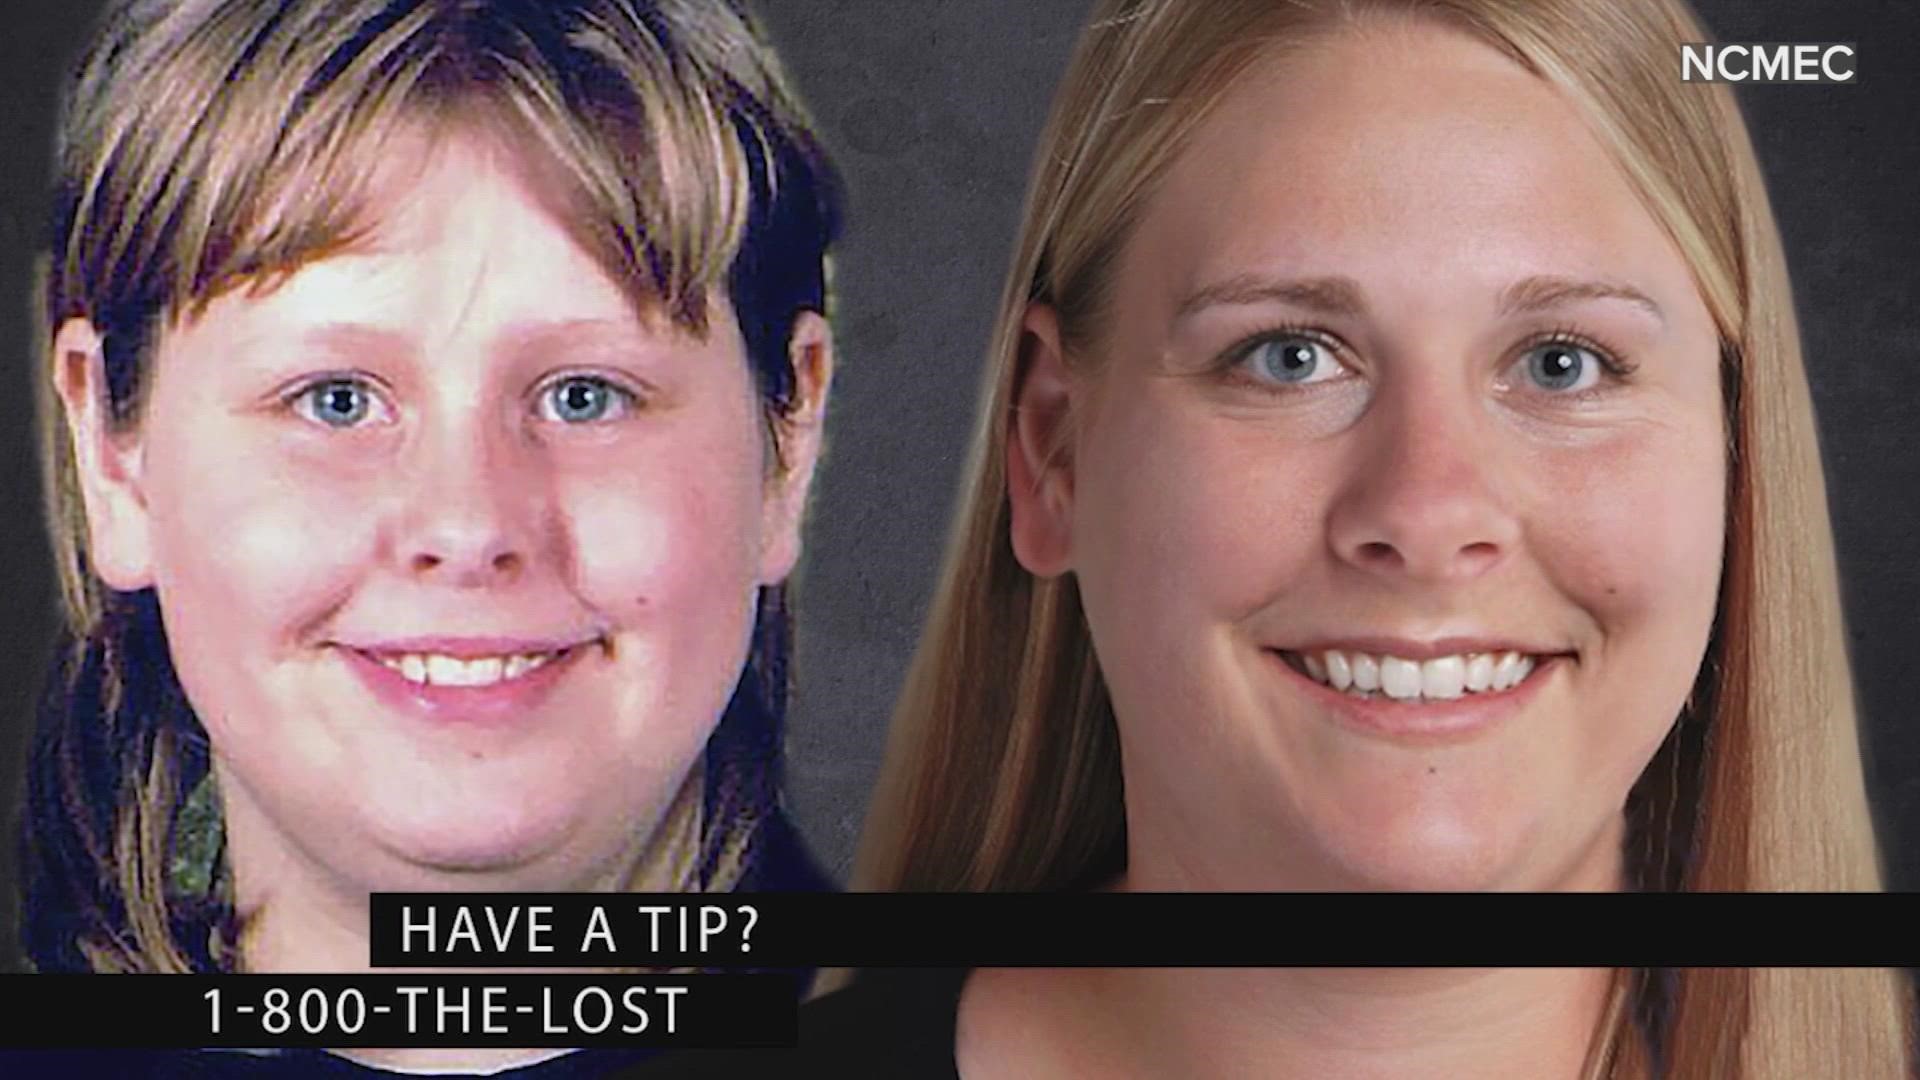 Michelle Prasek went missing at 12 years old on her way to school.